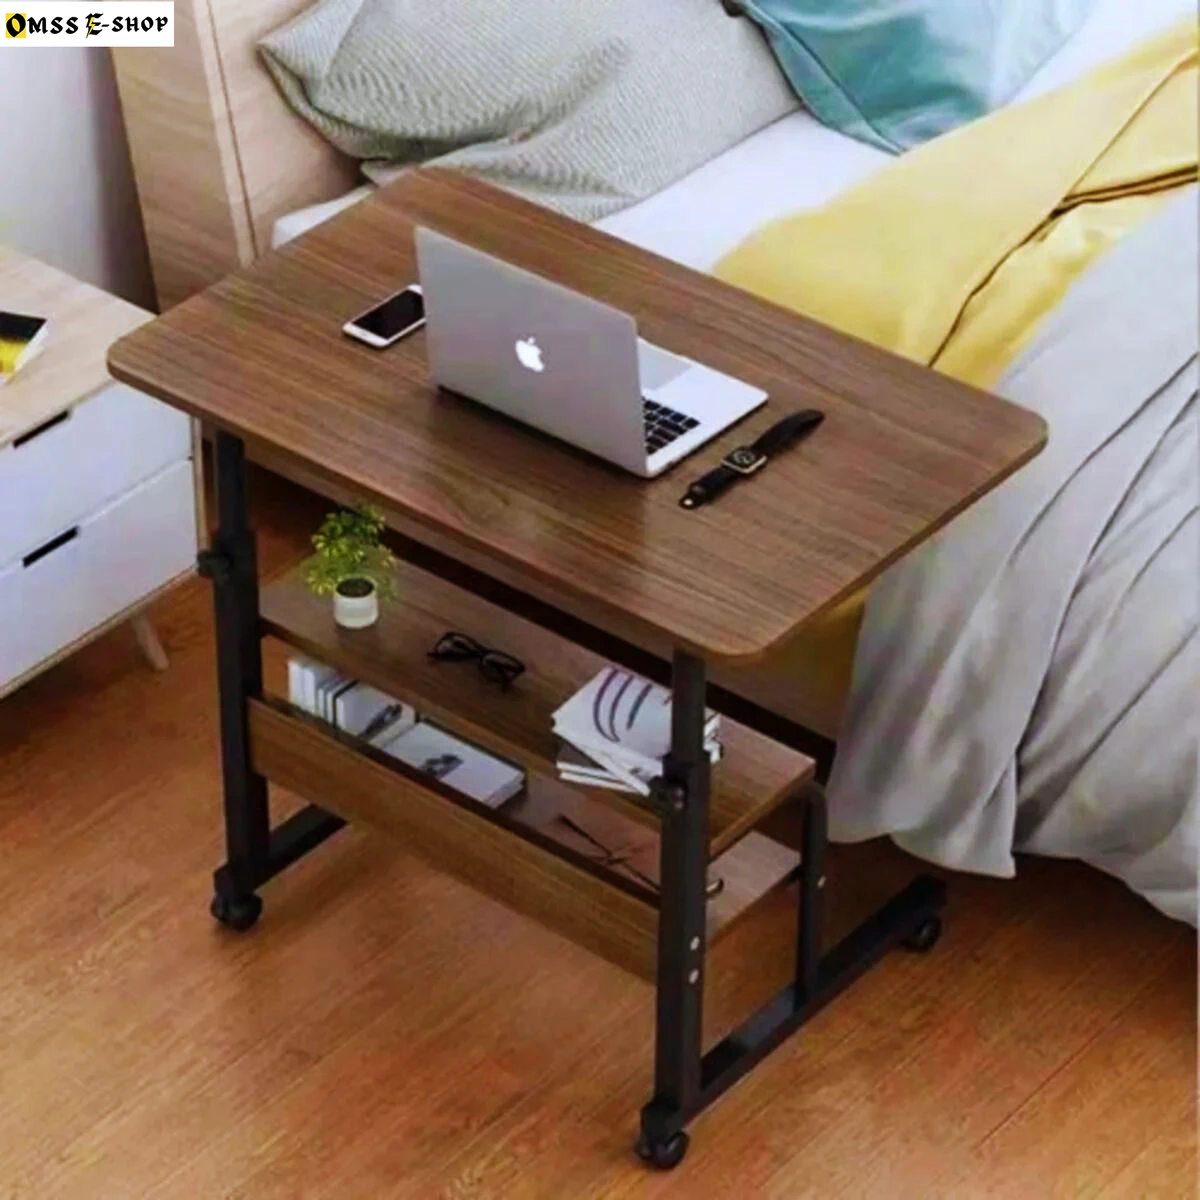 Double Layer Moveable-Foldable And Height Adjustable Computer Or Laptop Table, Study Table, Bed Side Table For Home And Office